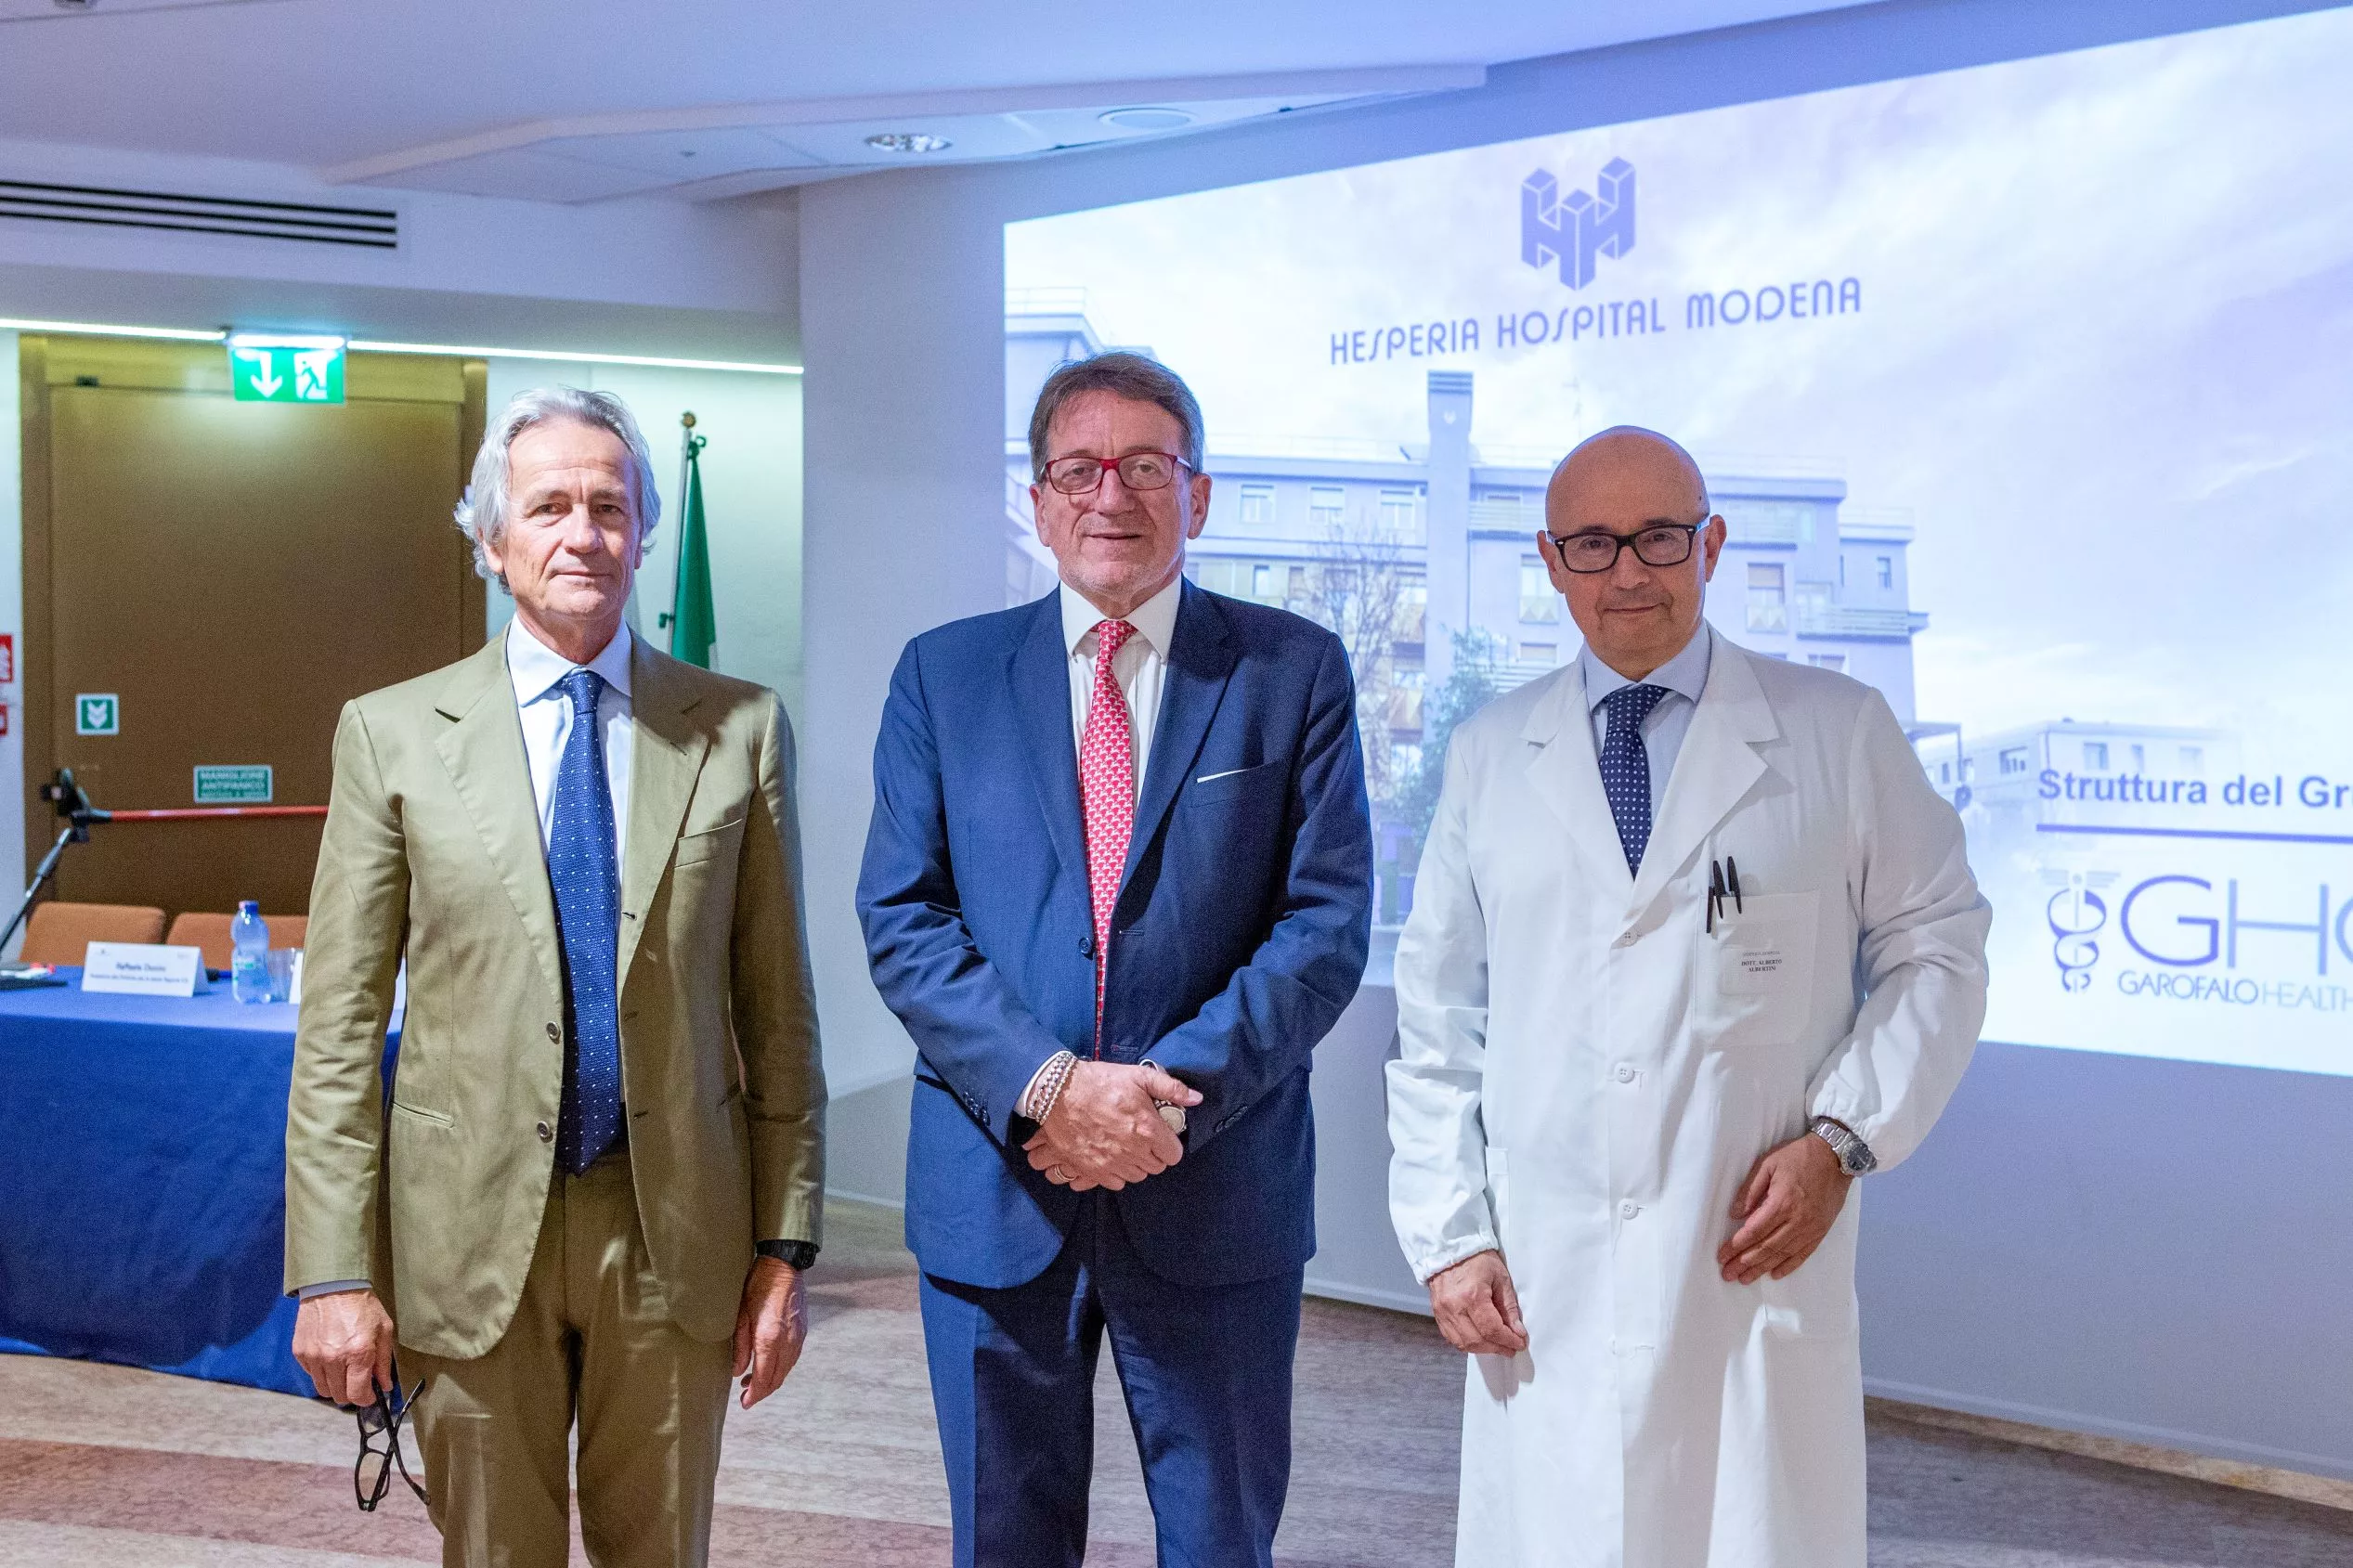 First robot-assisted cardiac surgery operation in Emilia Romagna